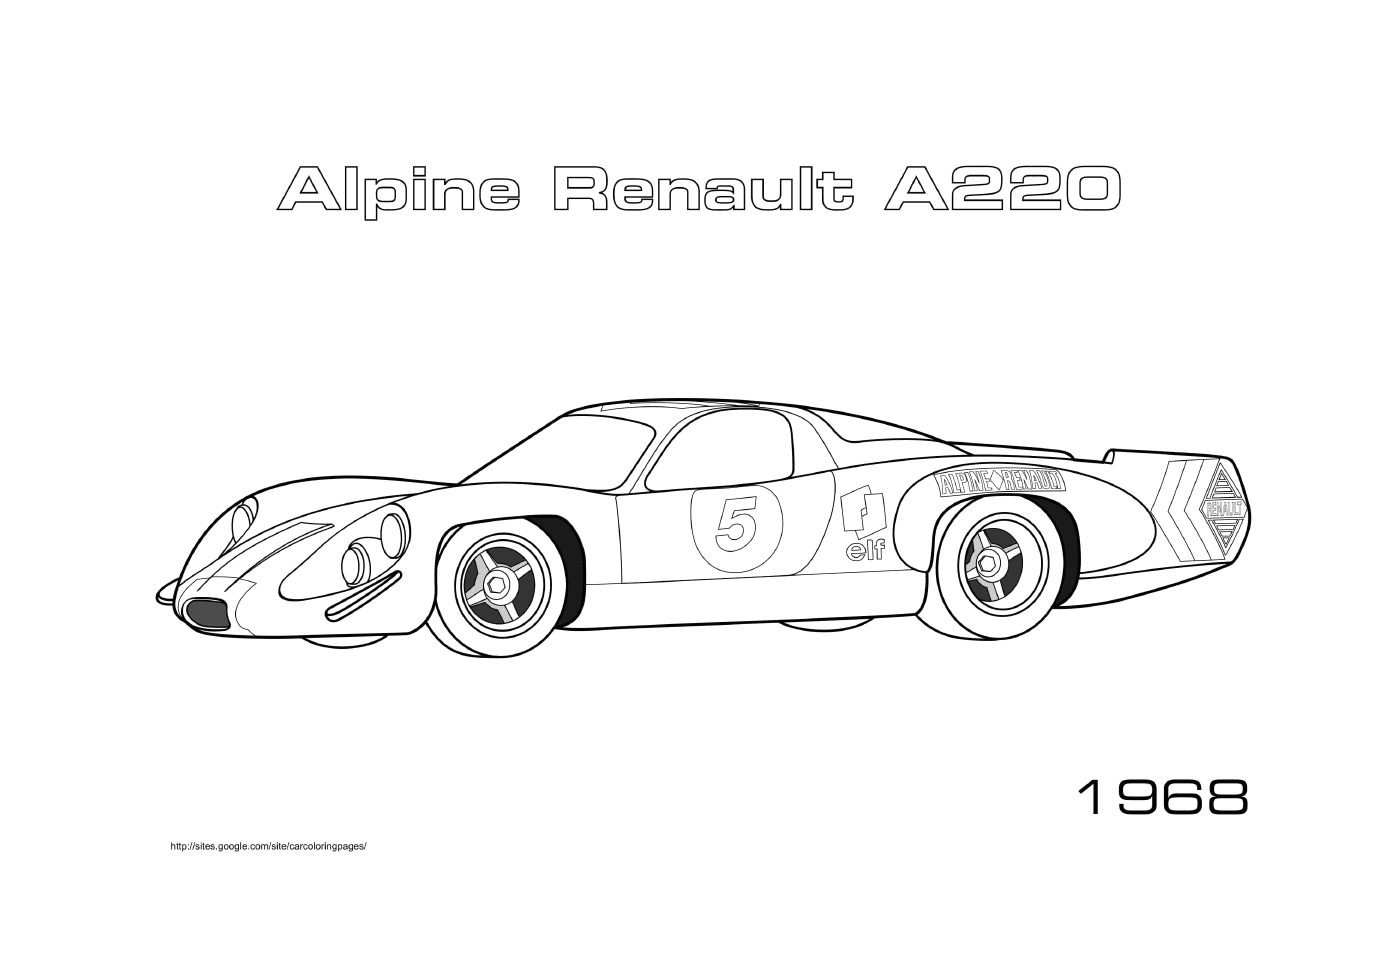  Alpine Renault A220 from 1968 